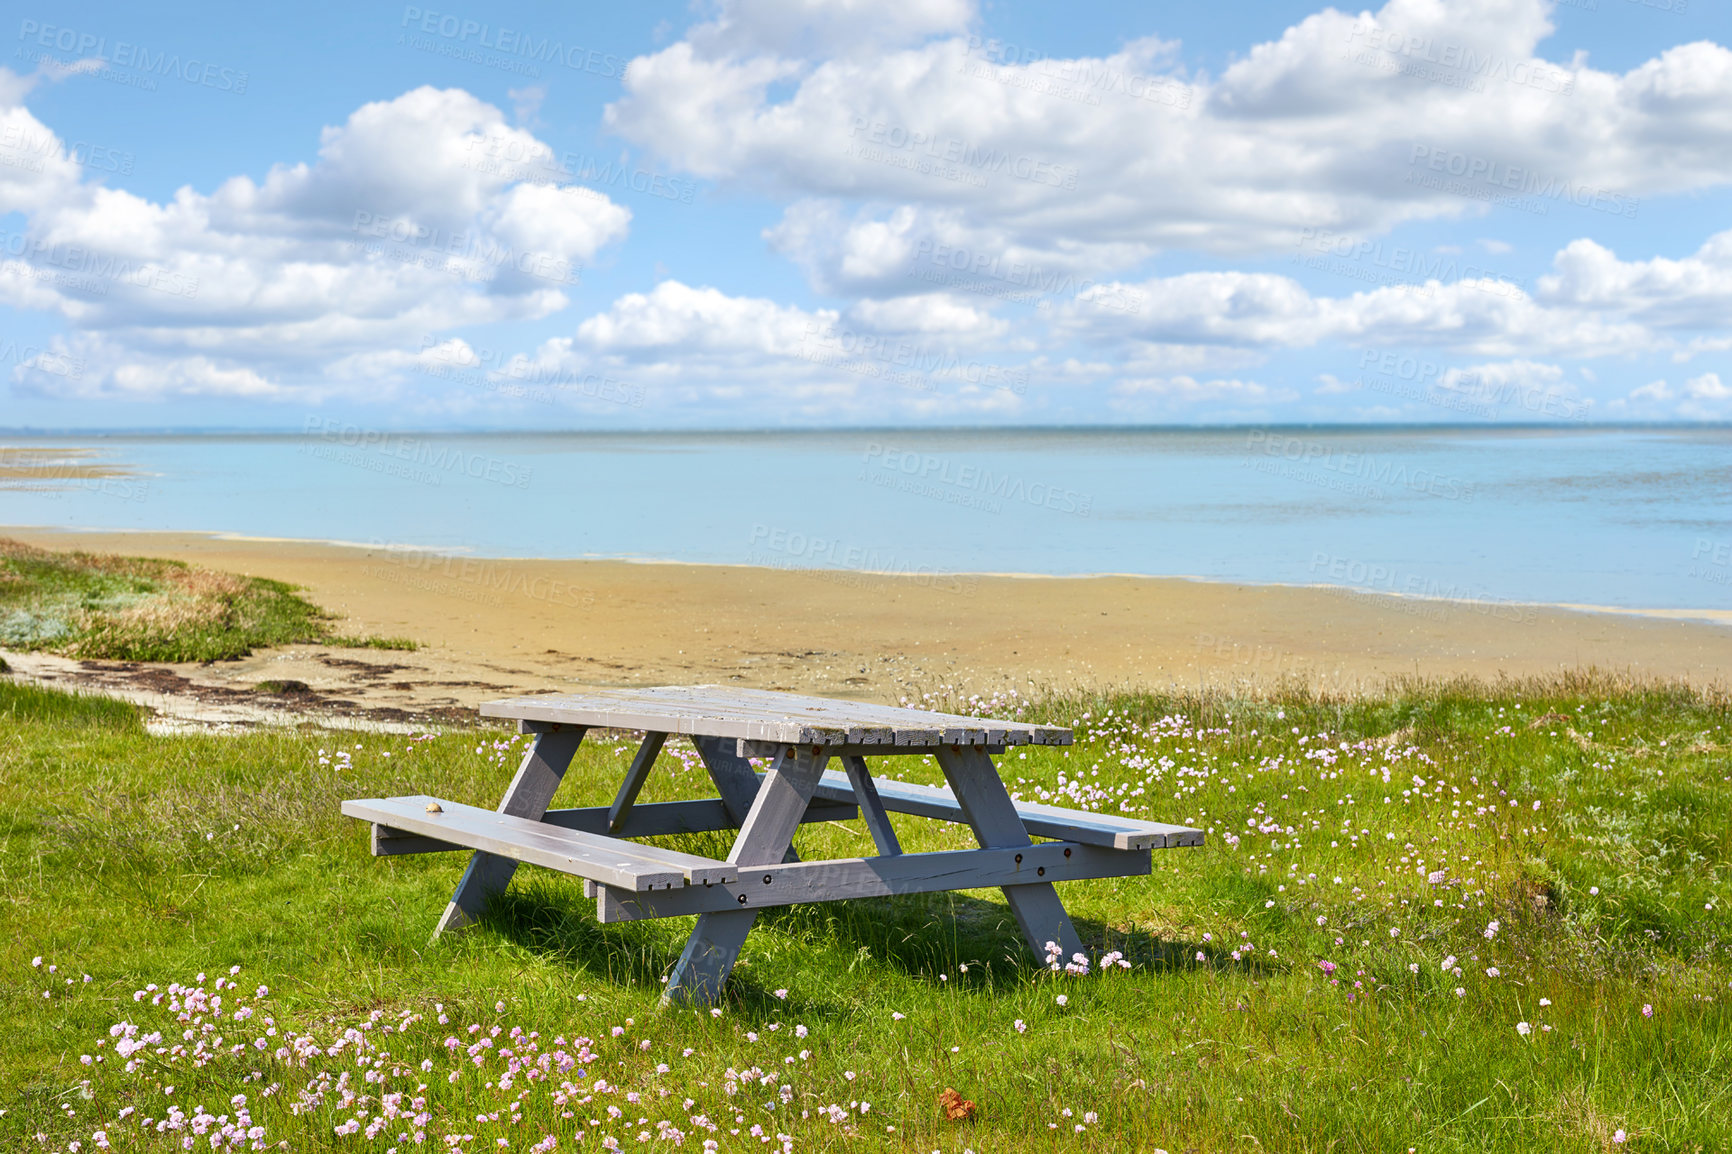 Buy stock photo Wooden picnic bench and table at the sea with cloudy blue sky background outdoors. Seating furniture at the beach to enjoy a peaceful day at the coast while taking a break from travel and exploring